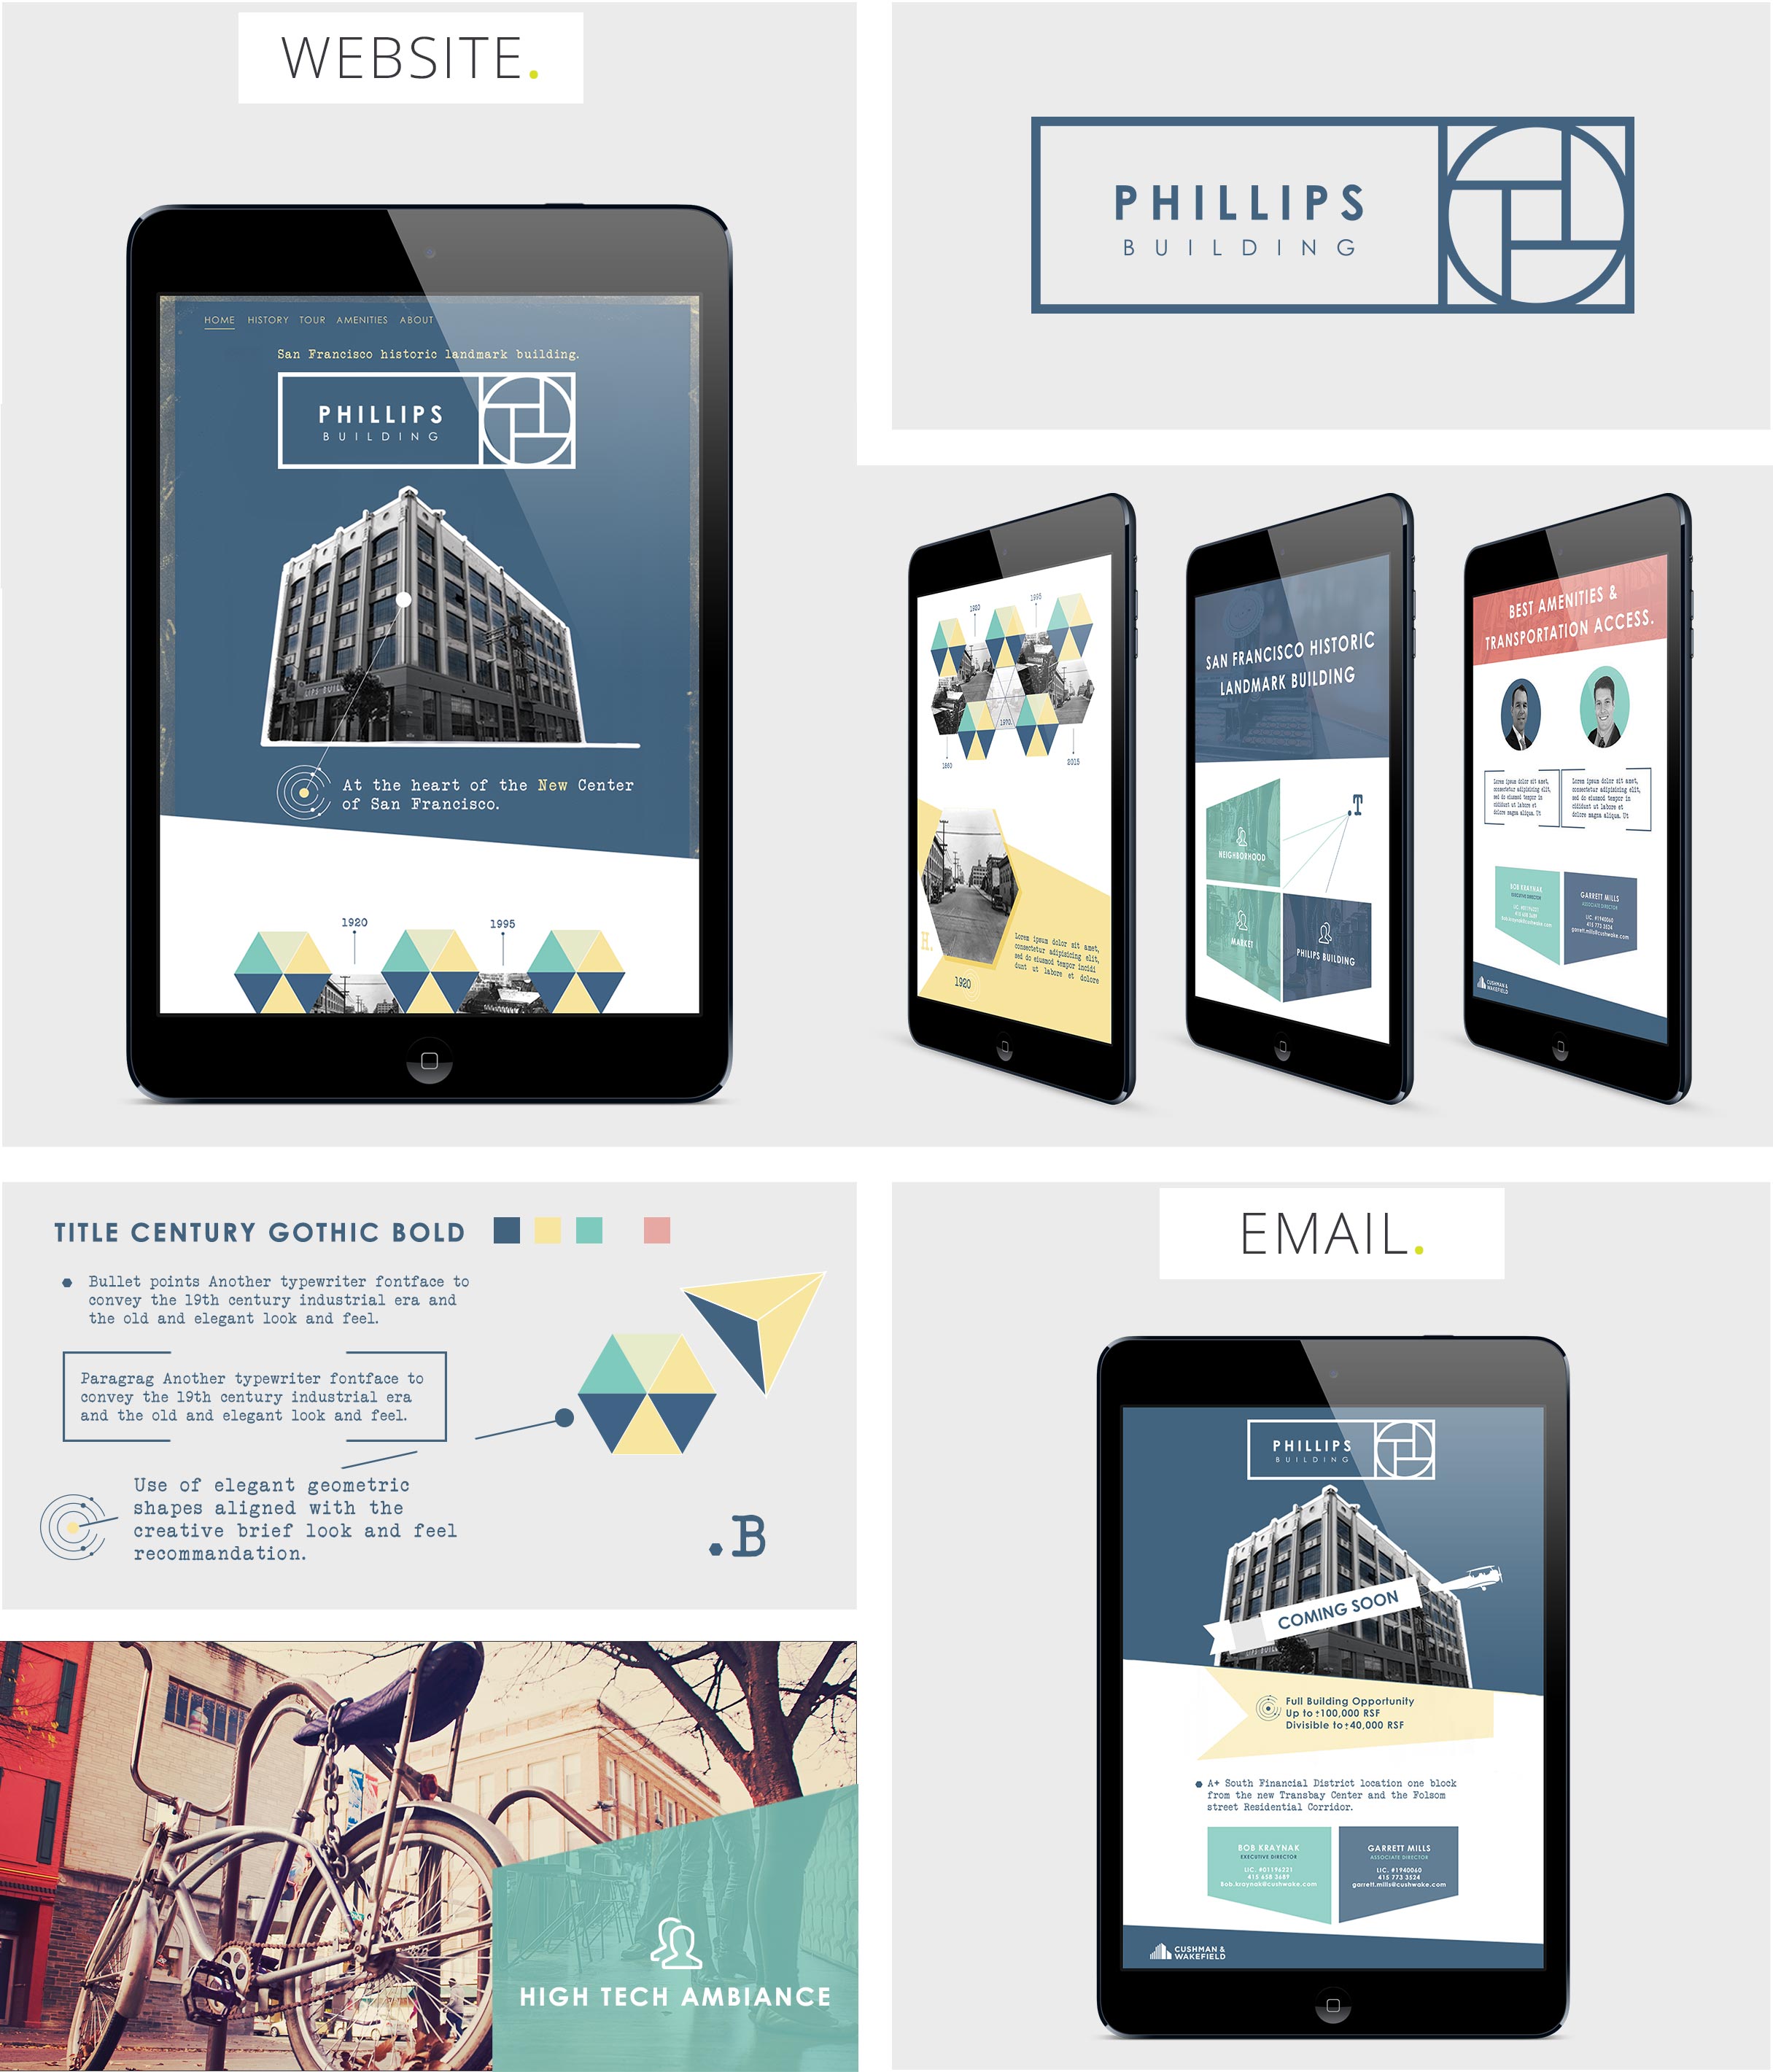 Philips Building Website and Email